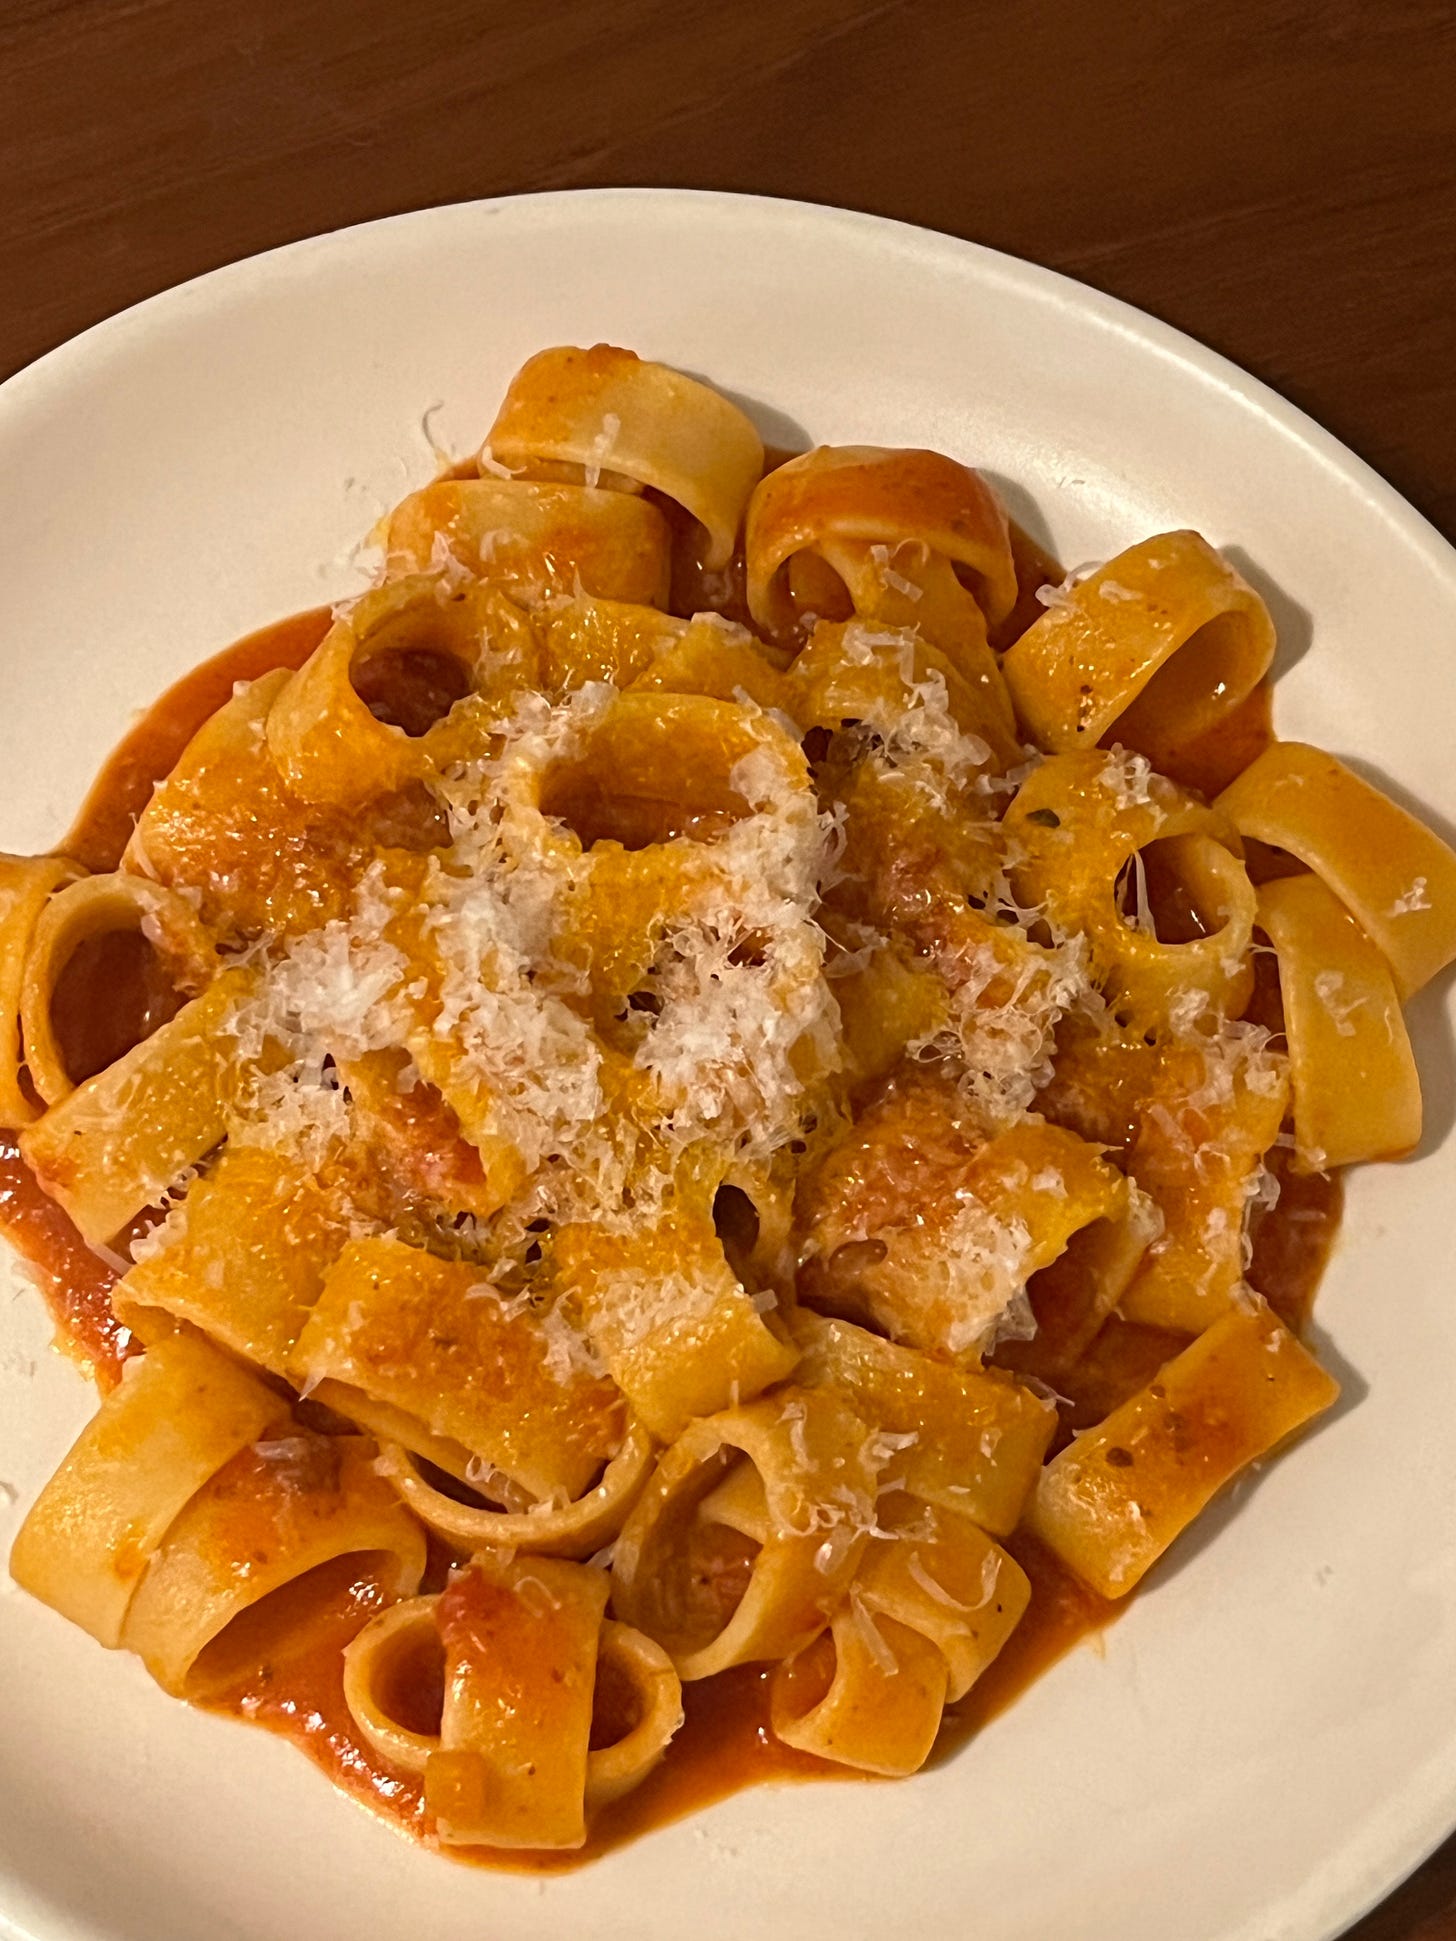 A plate of pasta with red sauce.